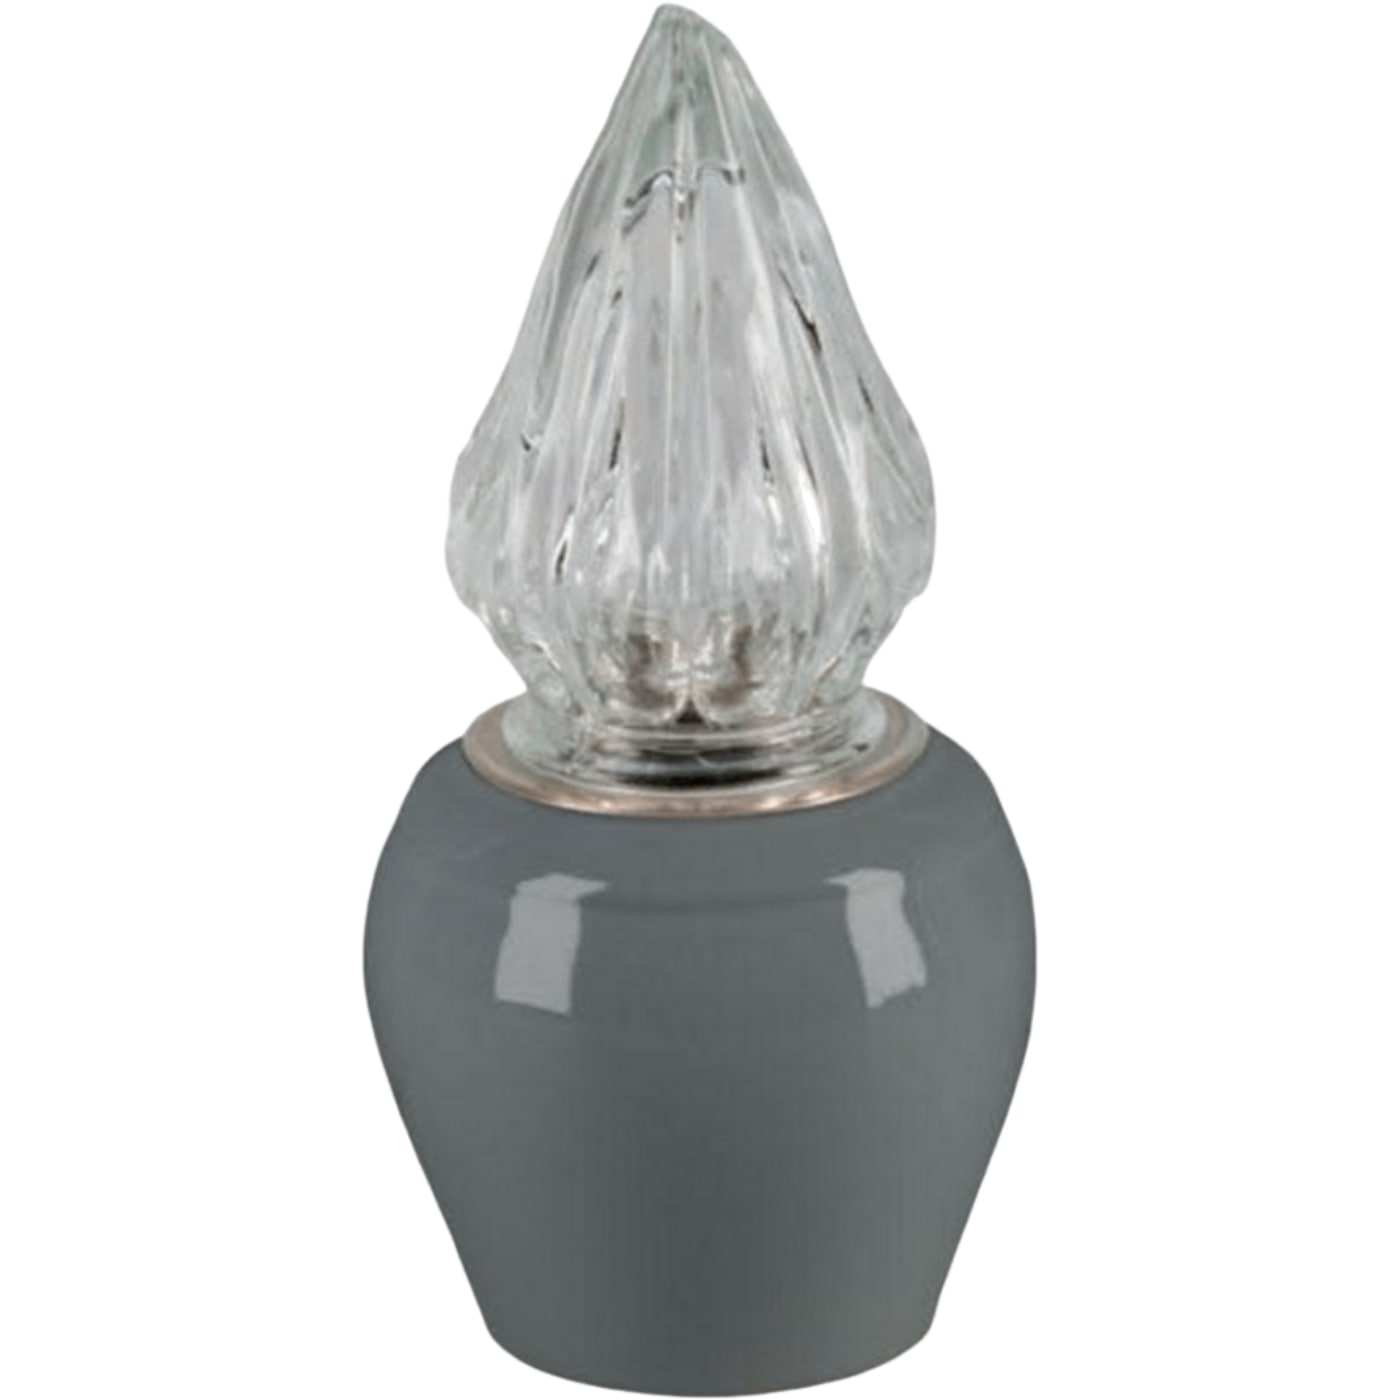 Grave light Liscia gray 10x10cm - 3.9x3.9in In gray porcelain, ground attached LI146T/G